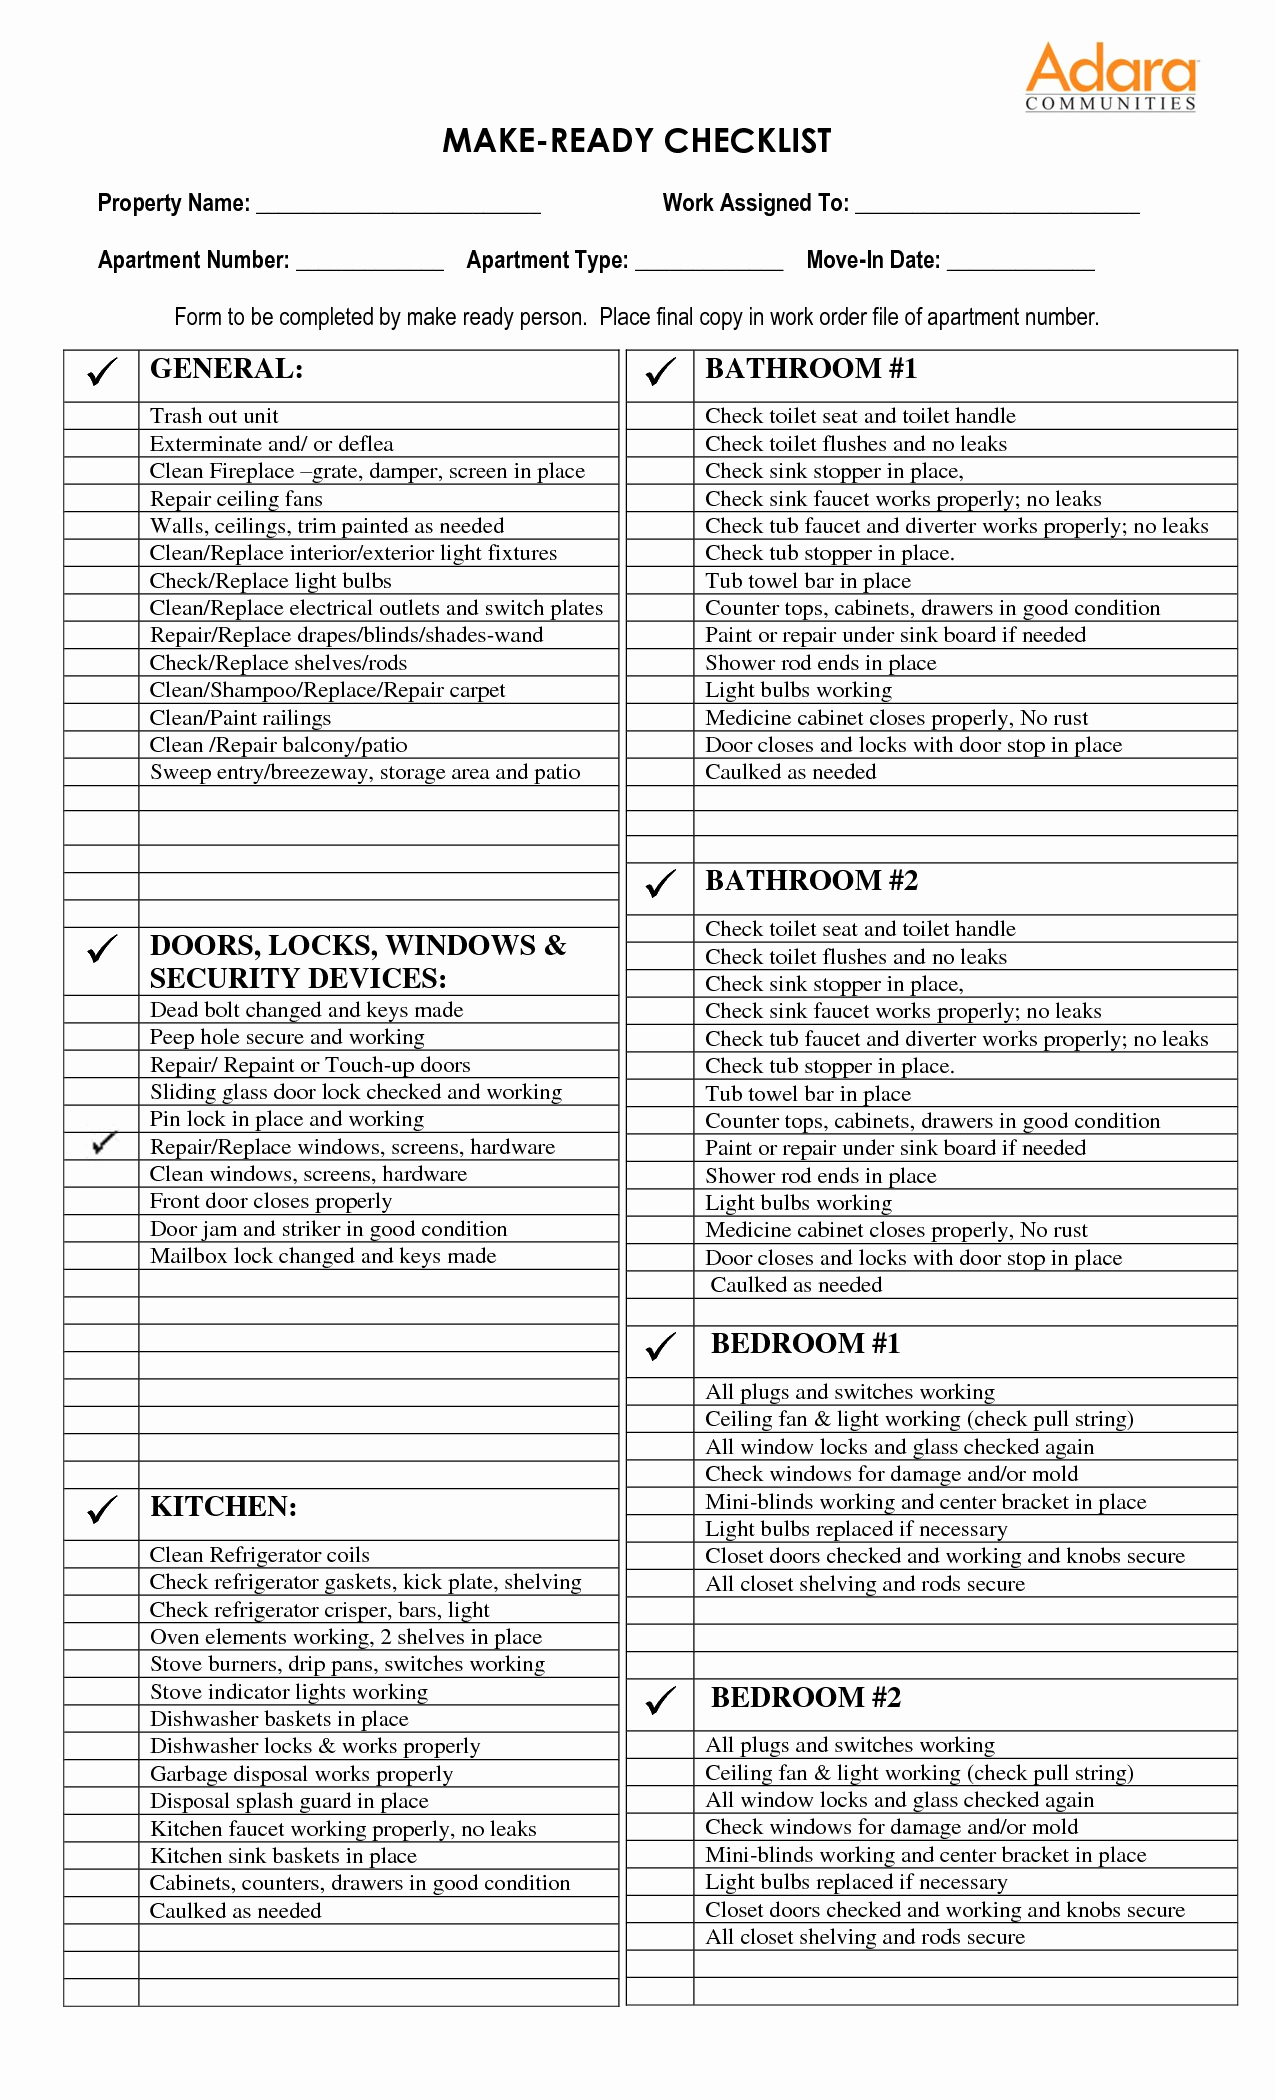 Apartment Maintenance Checklist Template Best Of Check List for Apartment Make Ready Google Search